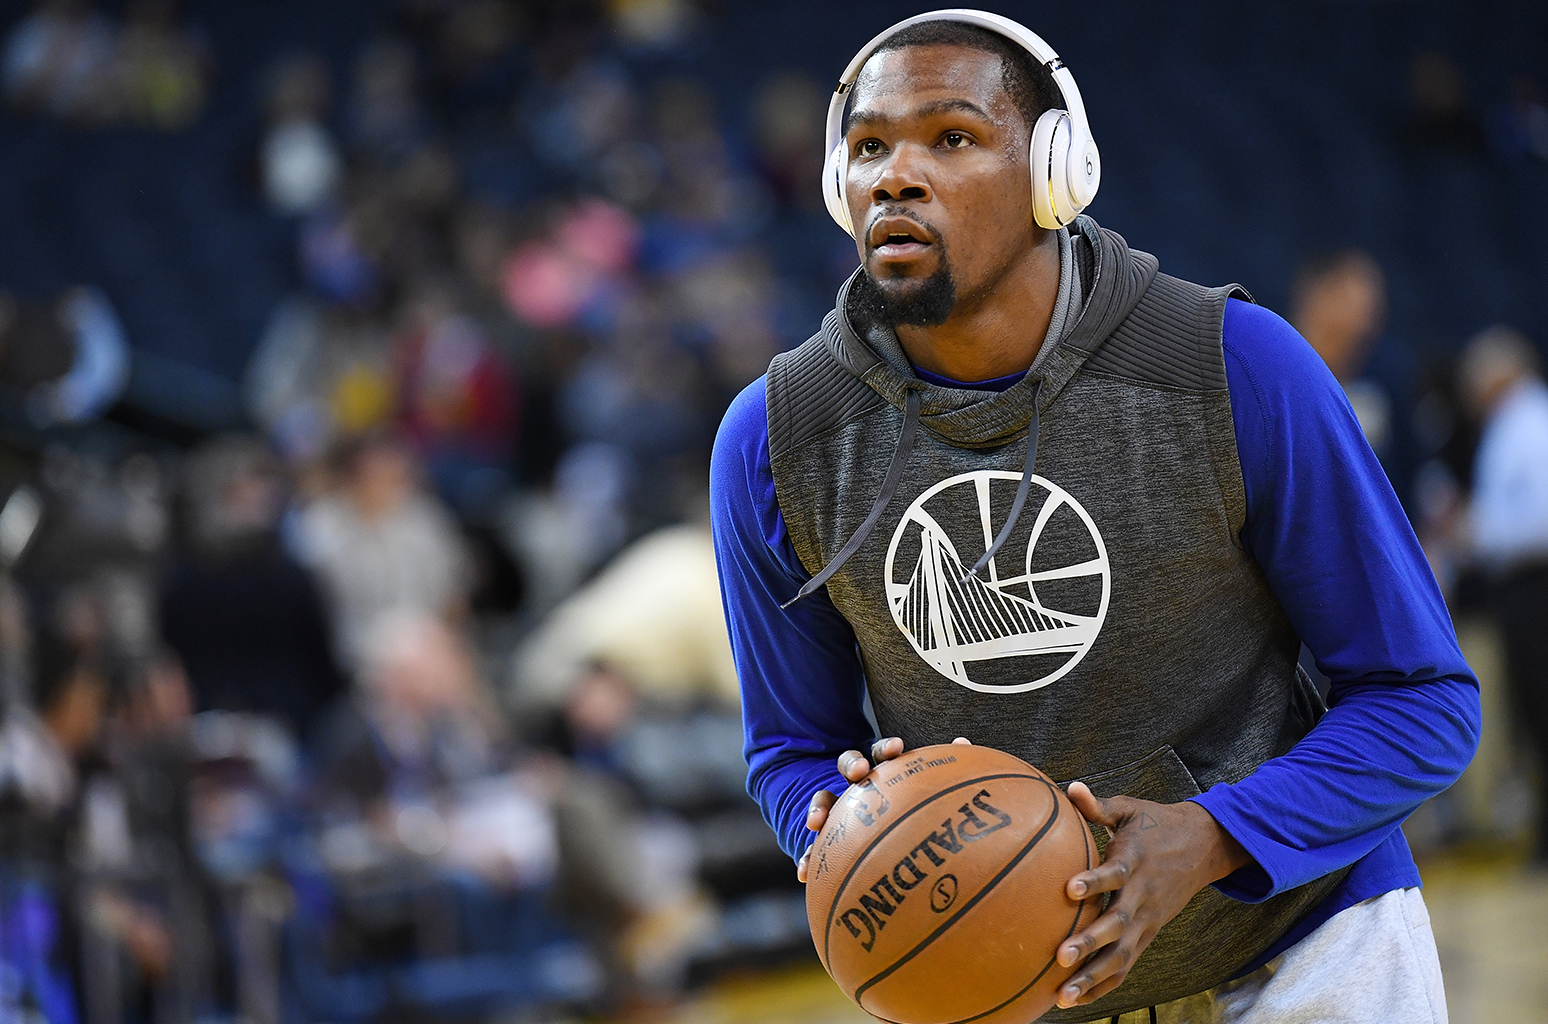 Beats by Dre are now NBA’s official headphone supplier